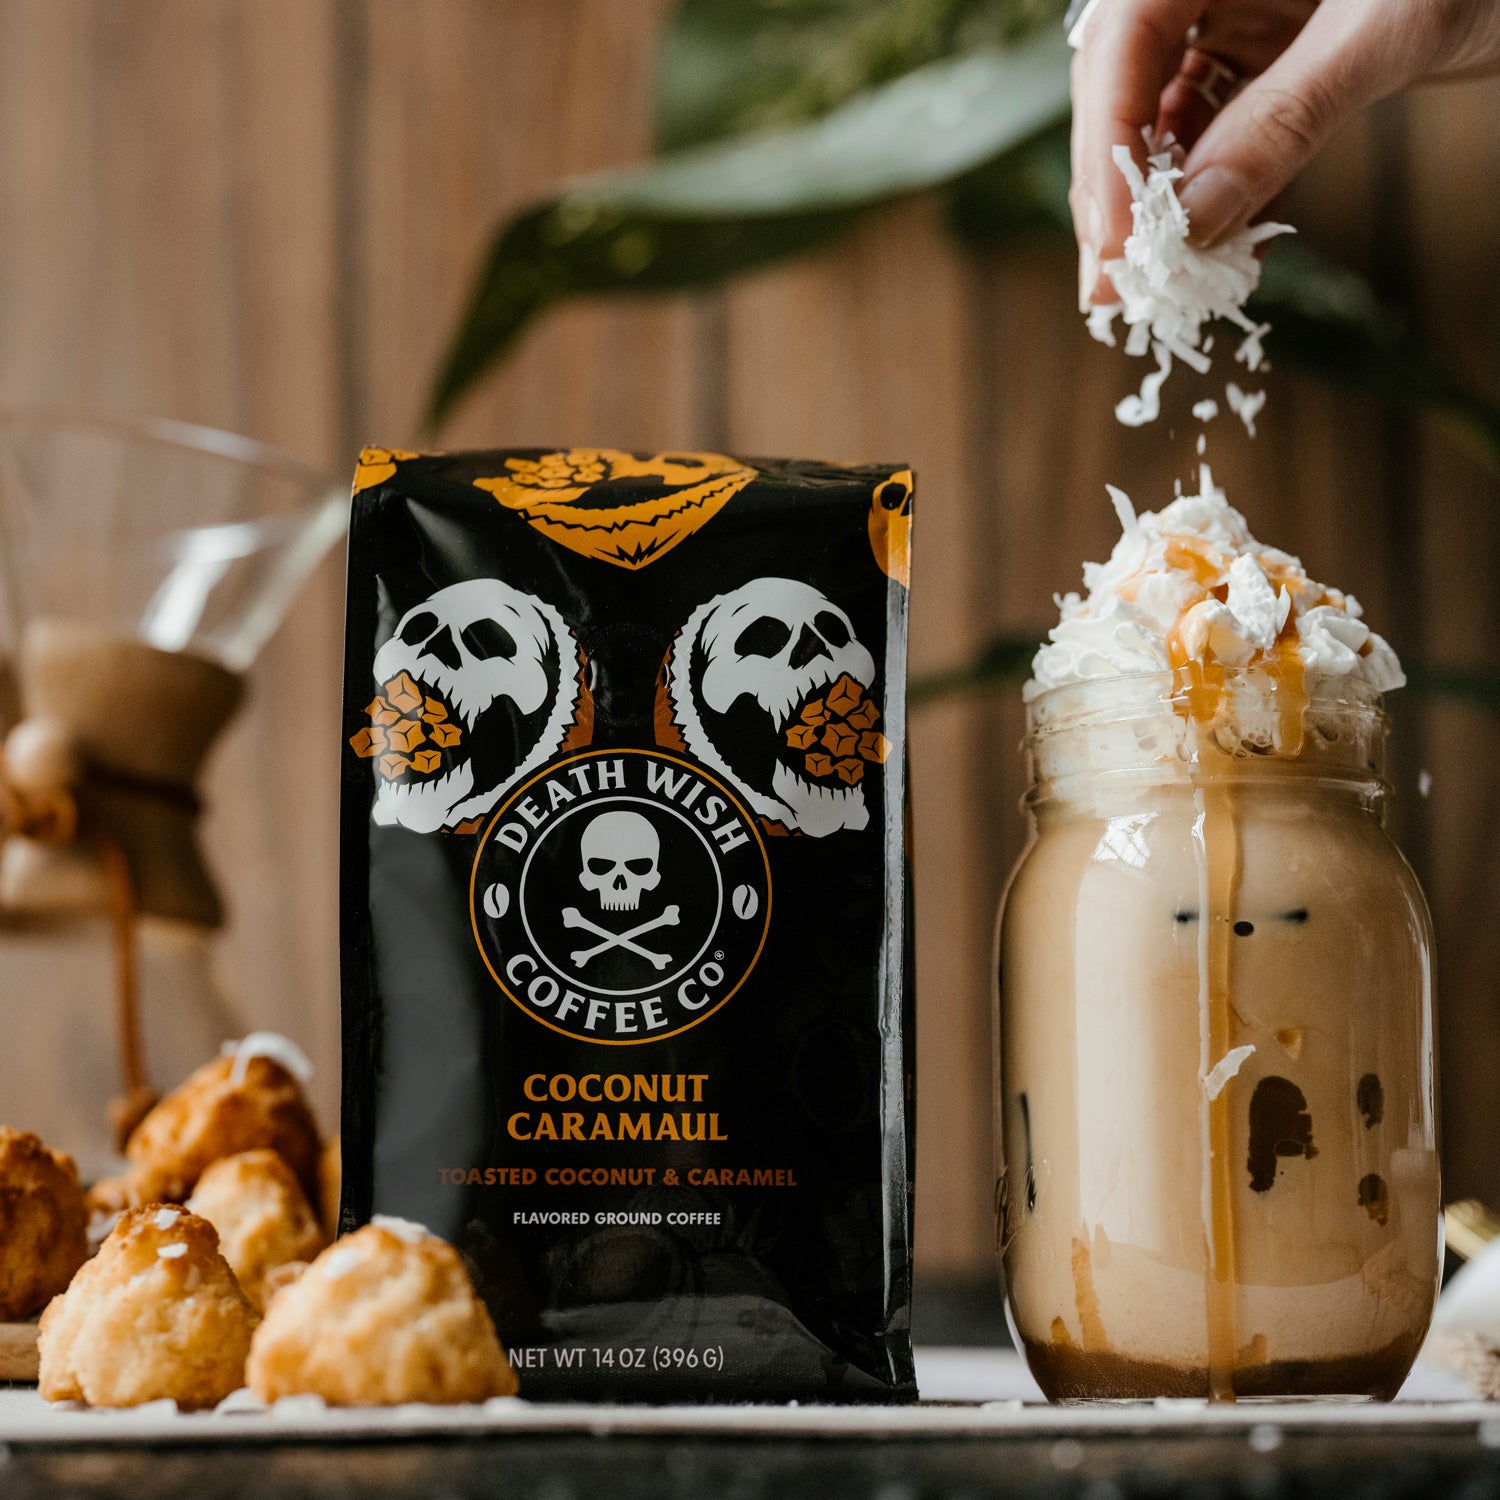 Topping Death Wish Coffee Coconut Caramaul Flavored Coffee with fresh coconut.